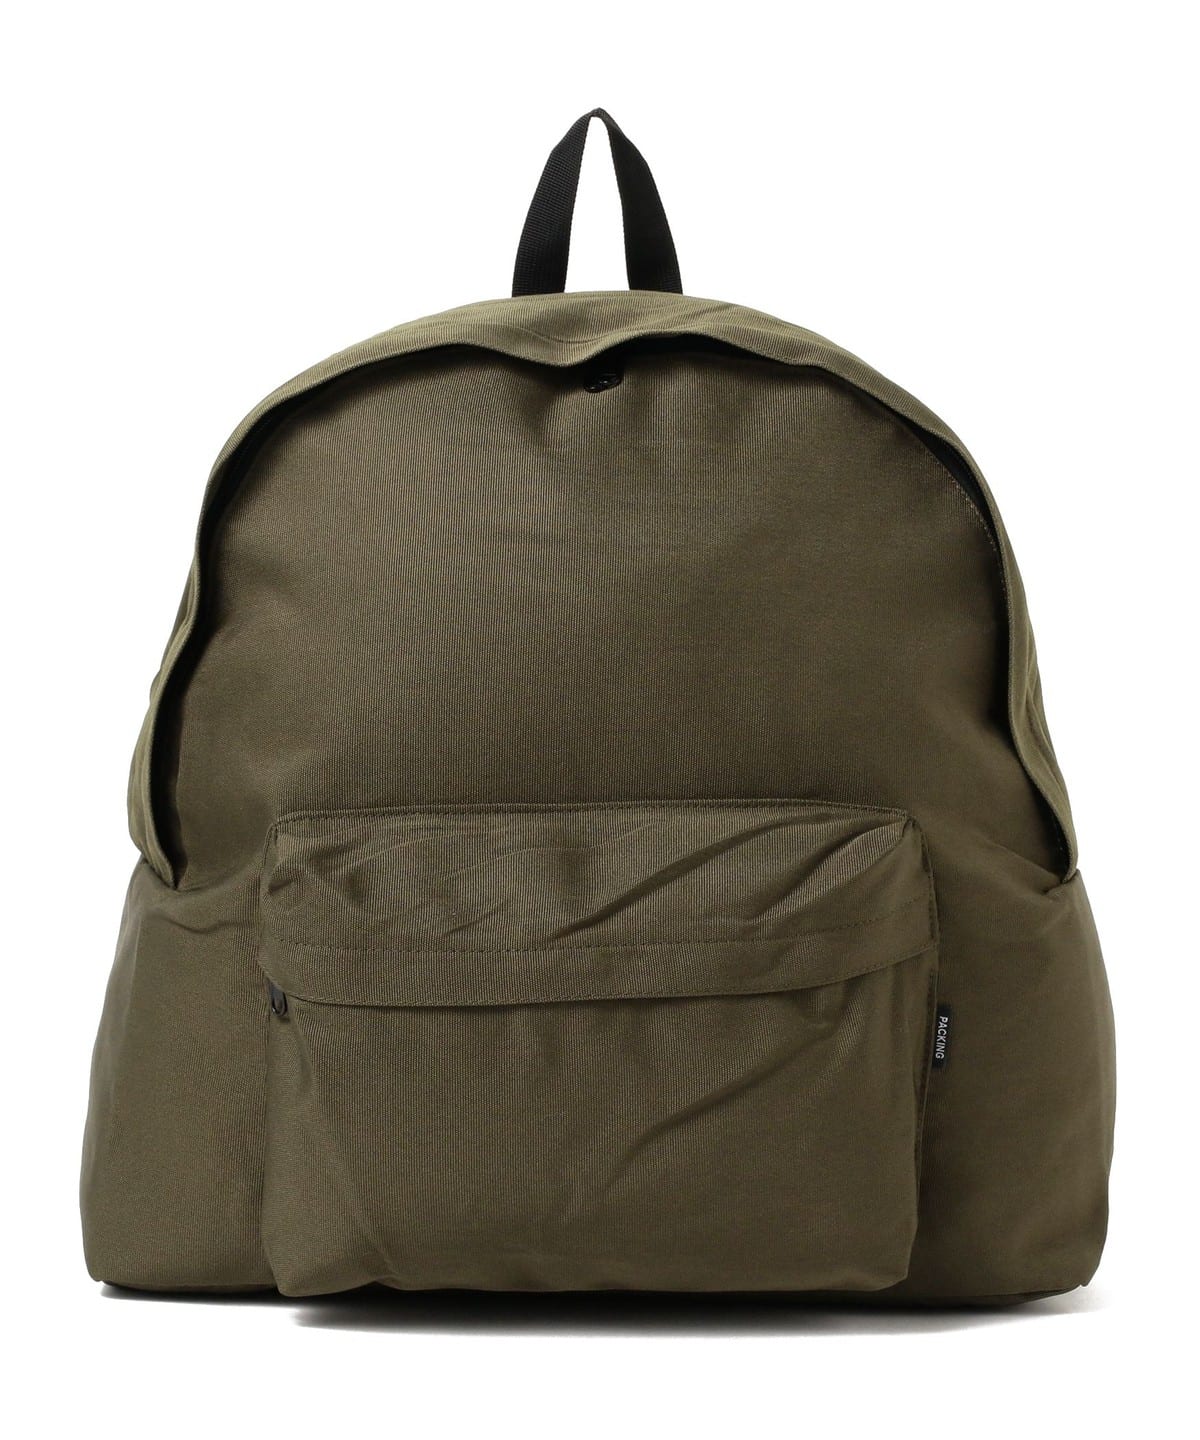 B:MING by BEAMS（ビーミング by ビームス）PACKING / BACKPACK